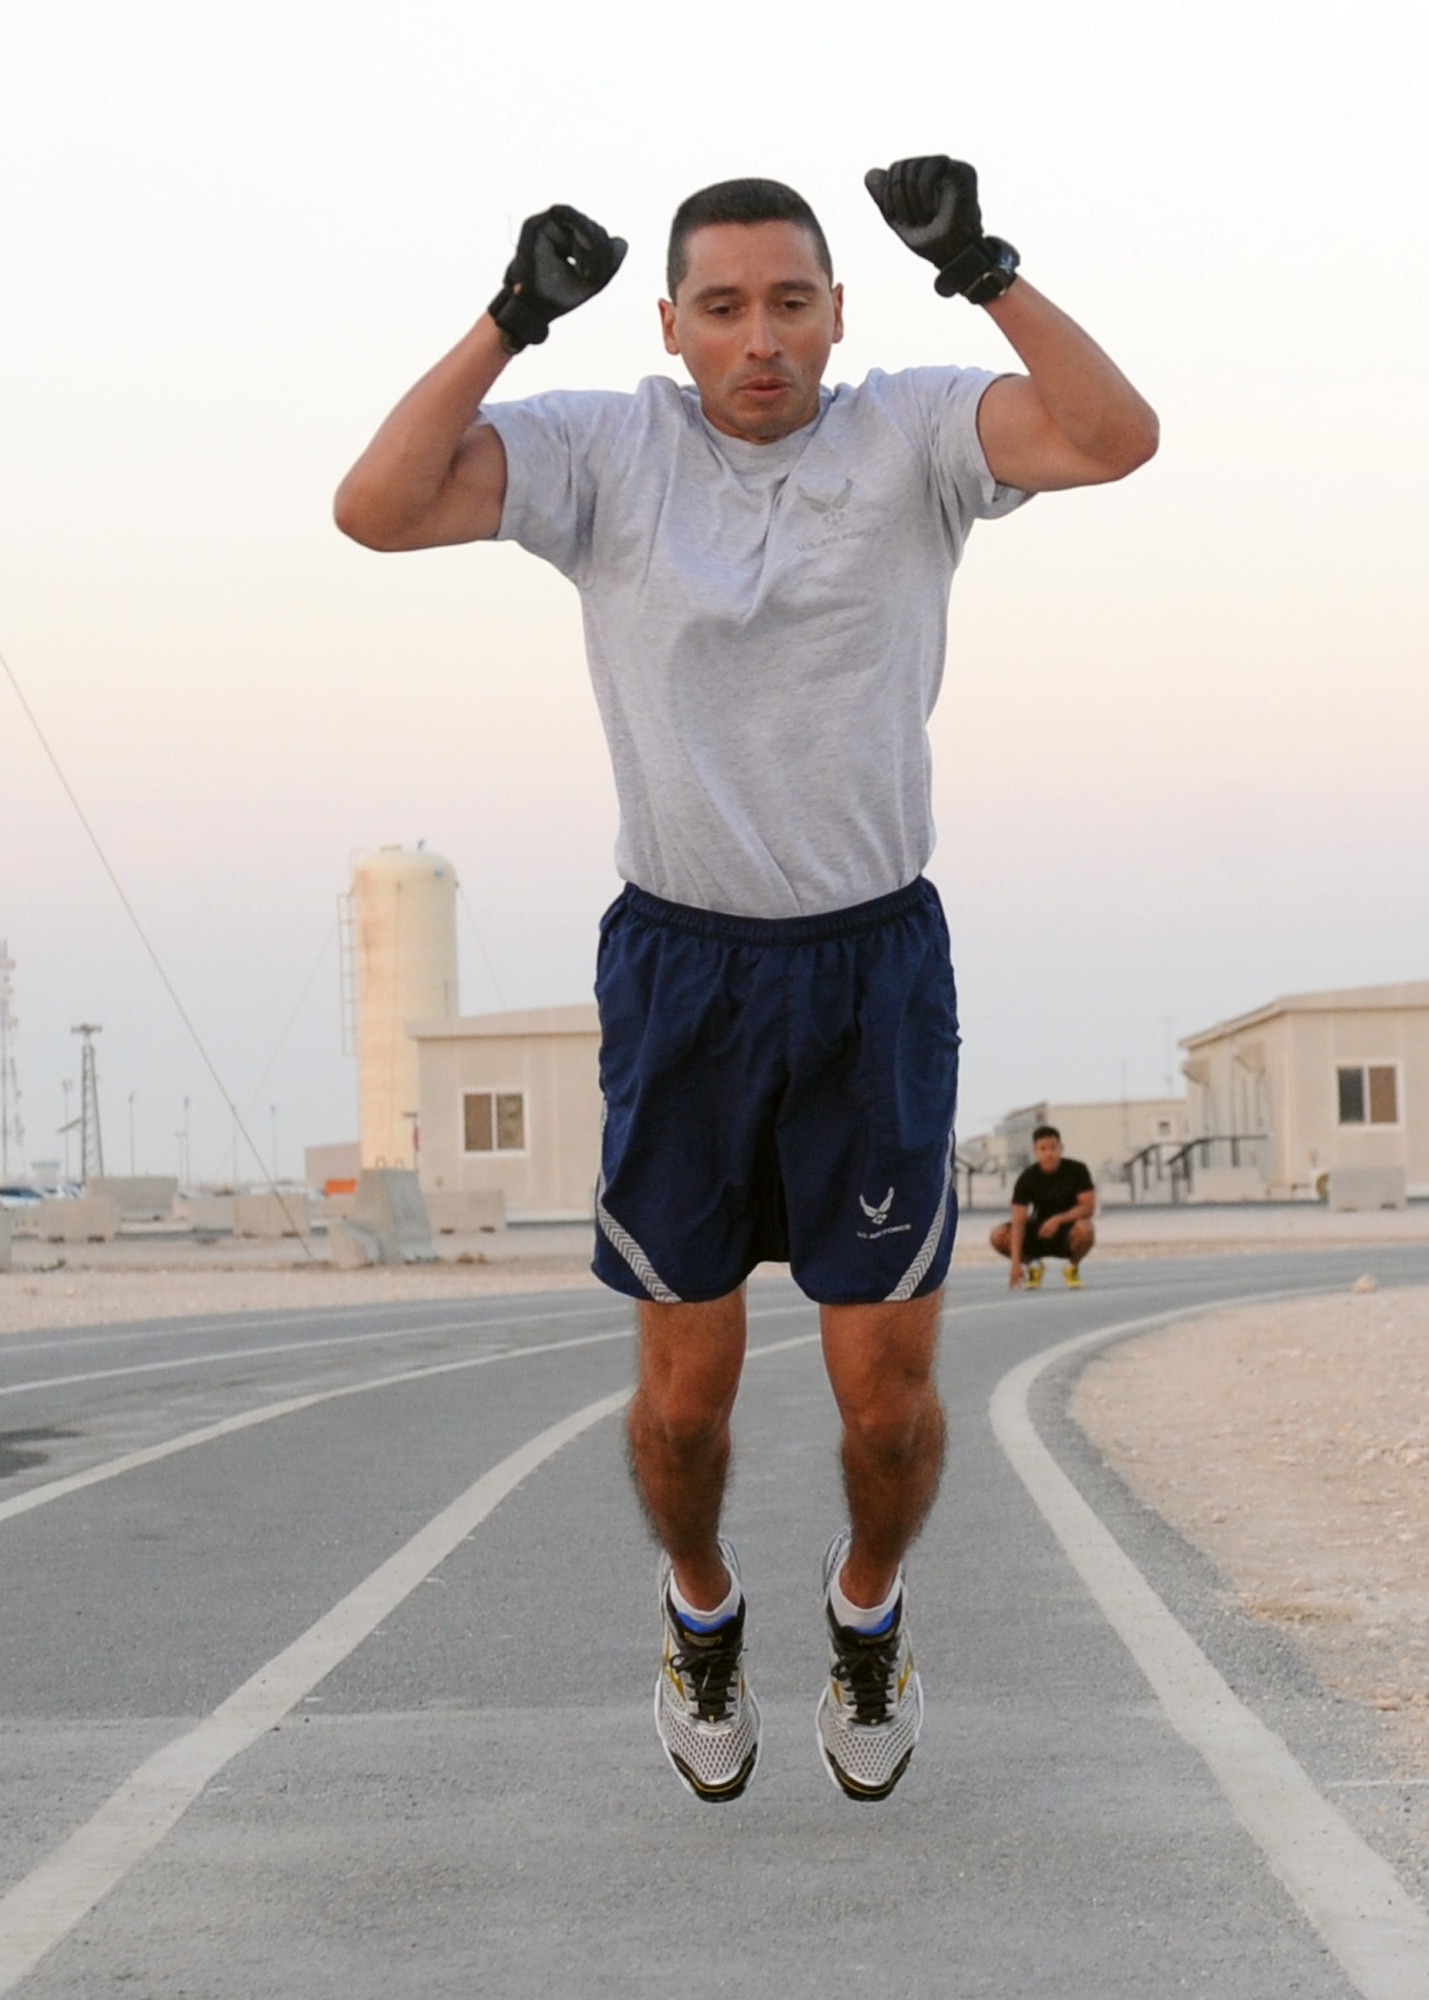 SOUTHWEST ASIA – Lt. Col. Joseph Terrones, 609th Air Communications Squadron Detachment 1 commander, leads his Airmen during the extreme burpee challenge Dec. 1. Terrones finished in third place with a time of 1 hour, 44 minutes and 49 seconds. Only four Airmen completed the entire mile during the challenge, but everyone was able to at least complete one lap around the track. It was estimated it would take approximately 220 burpees to complete one lap around the track – if the Airman had a decent leap forward. (U.S. Air Force photo/Senior Airman Joel Mease)